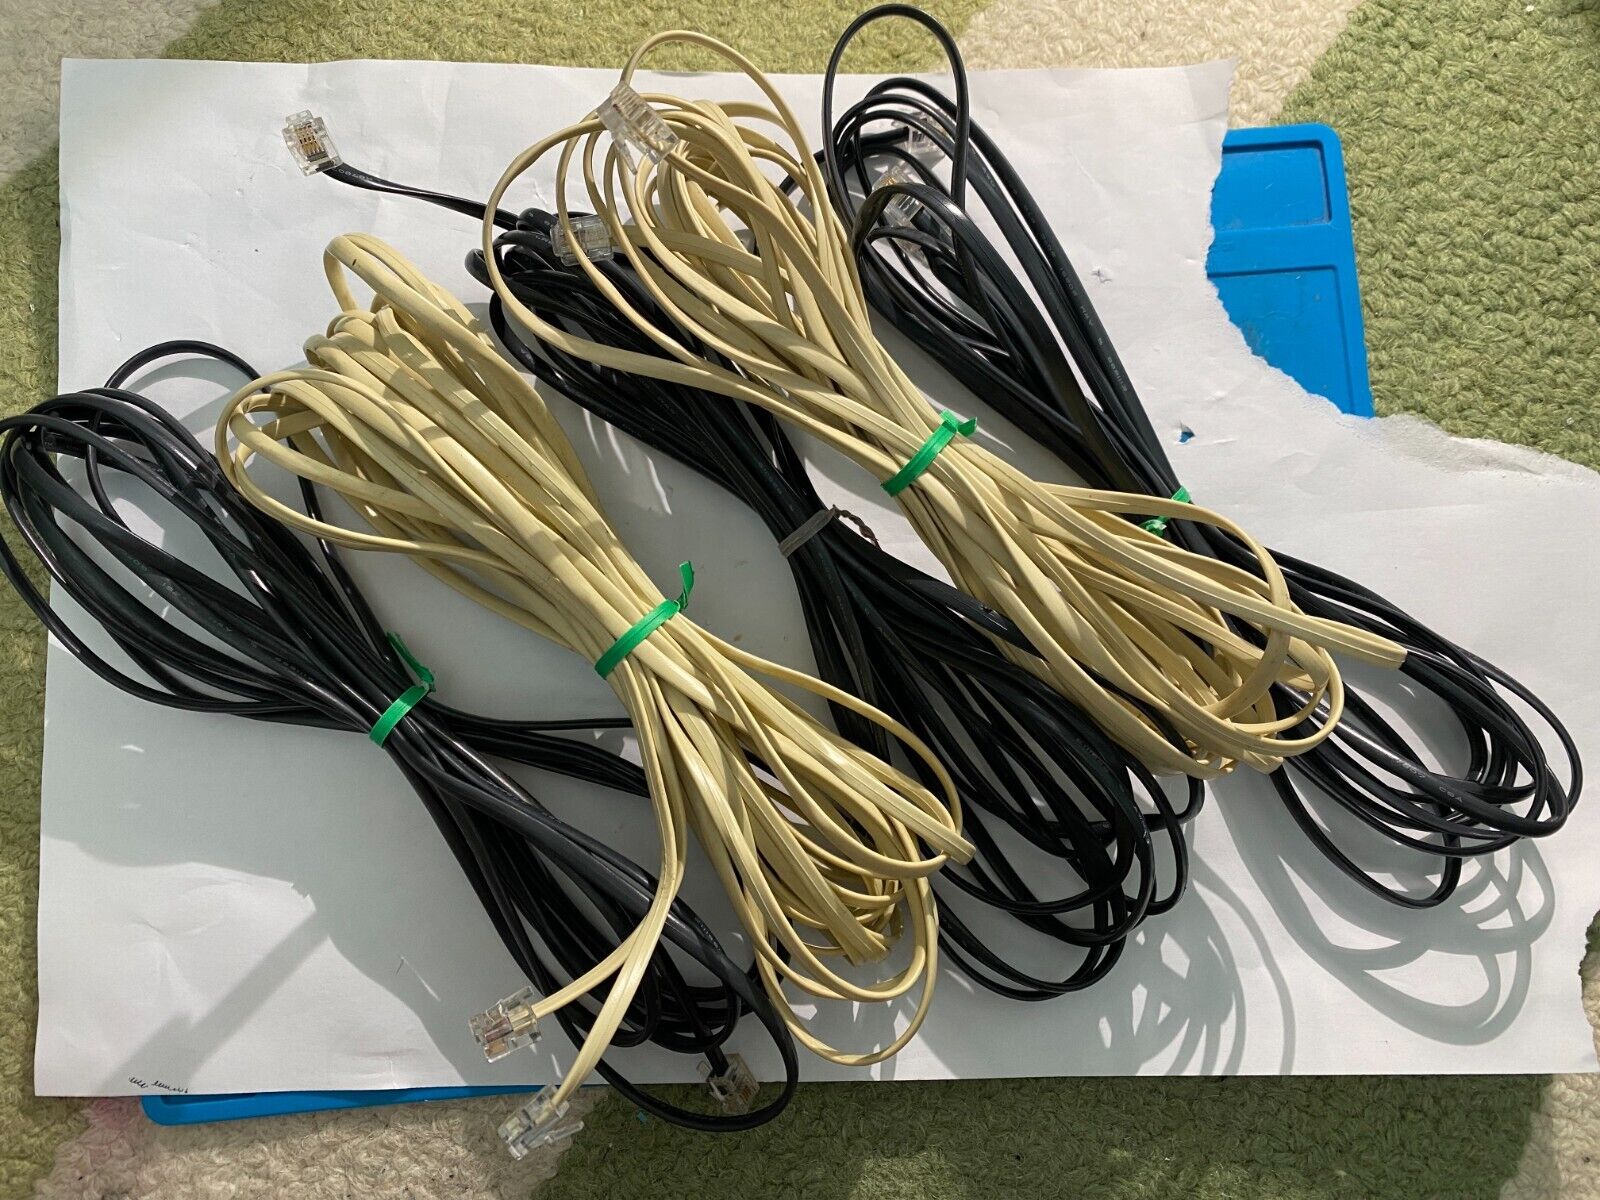 LOT of 5 RJ-11 cables